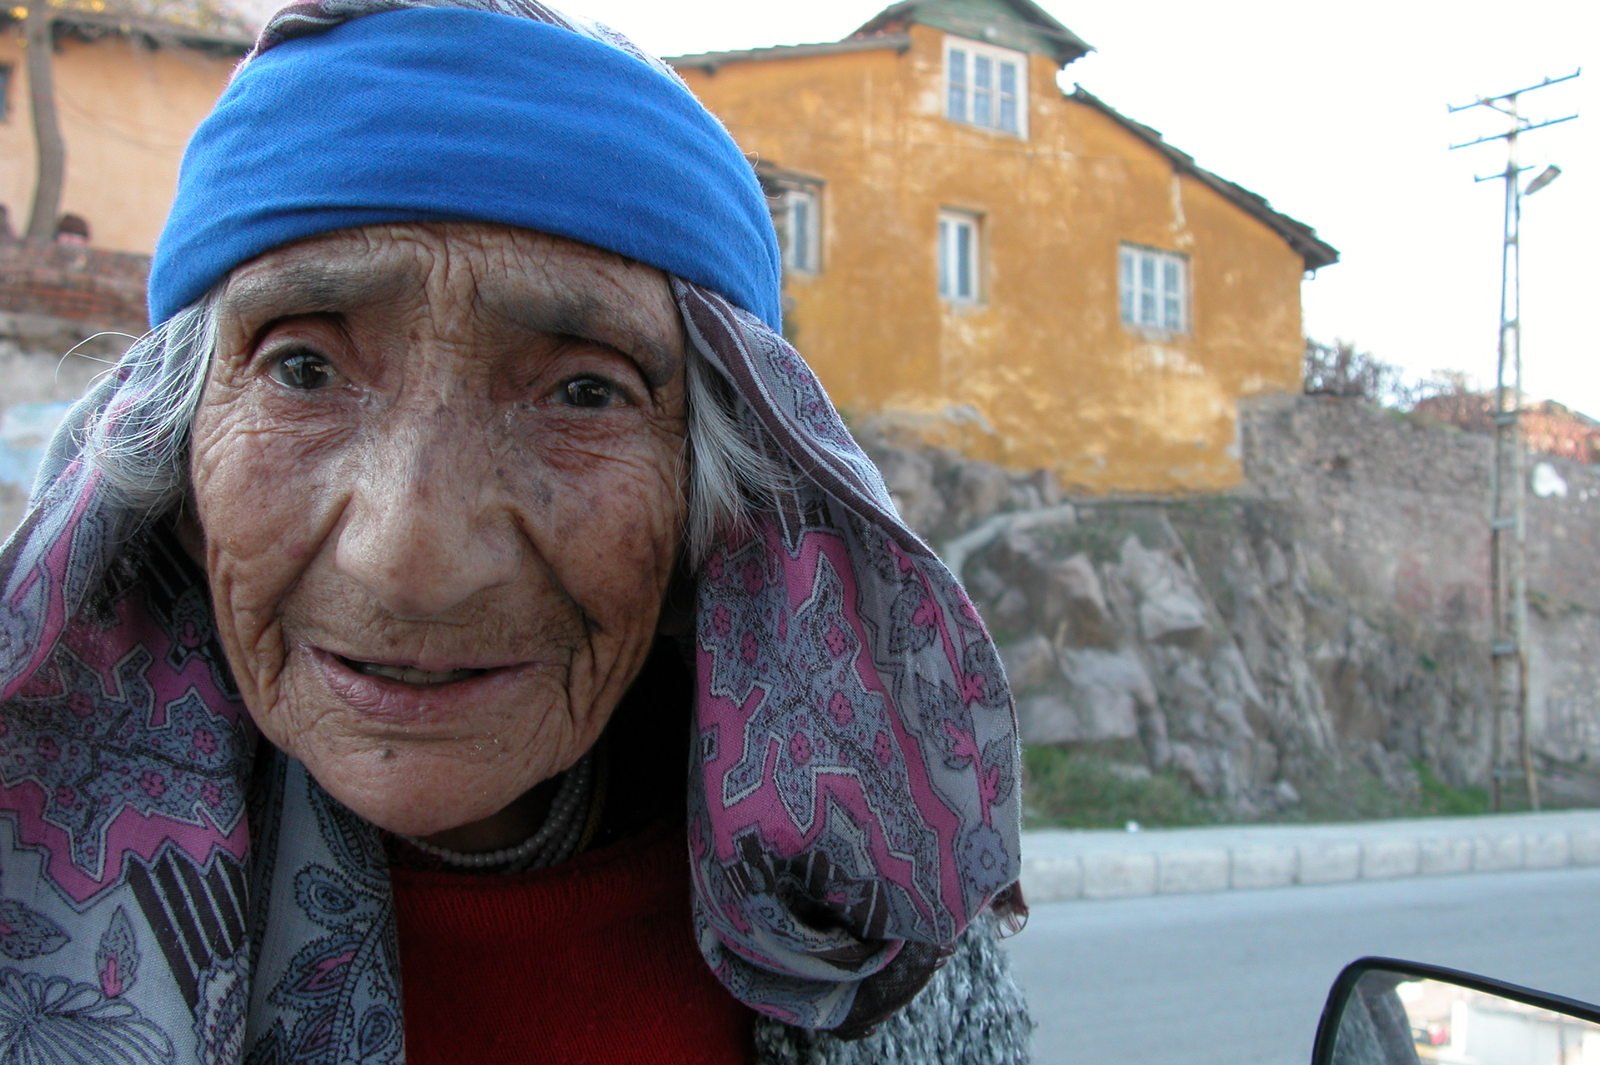 an old woman with big blue hair and a blue hat